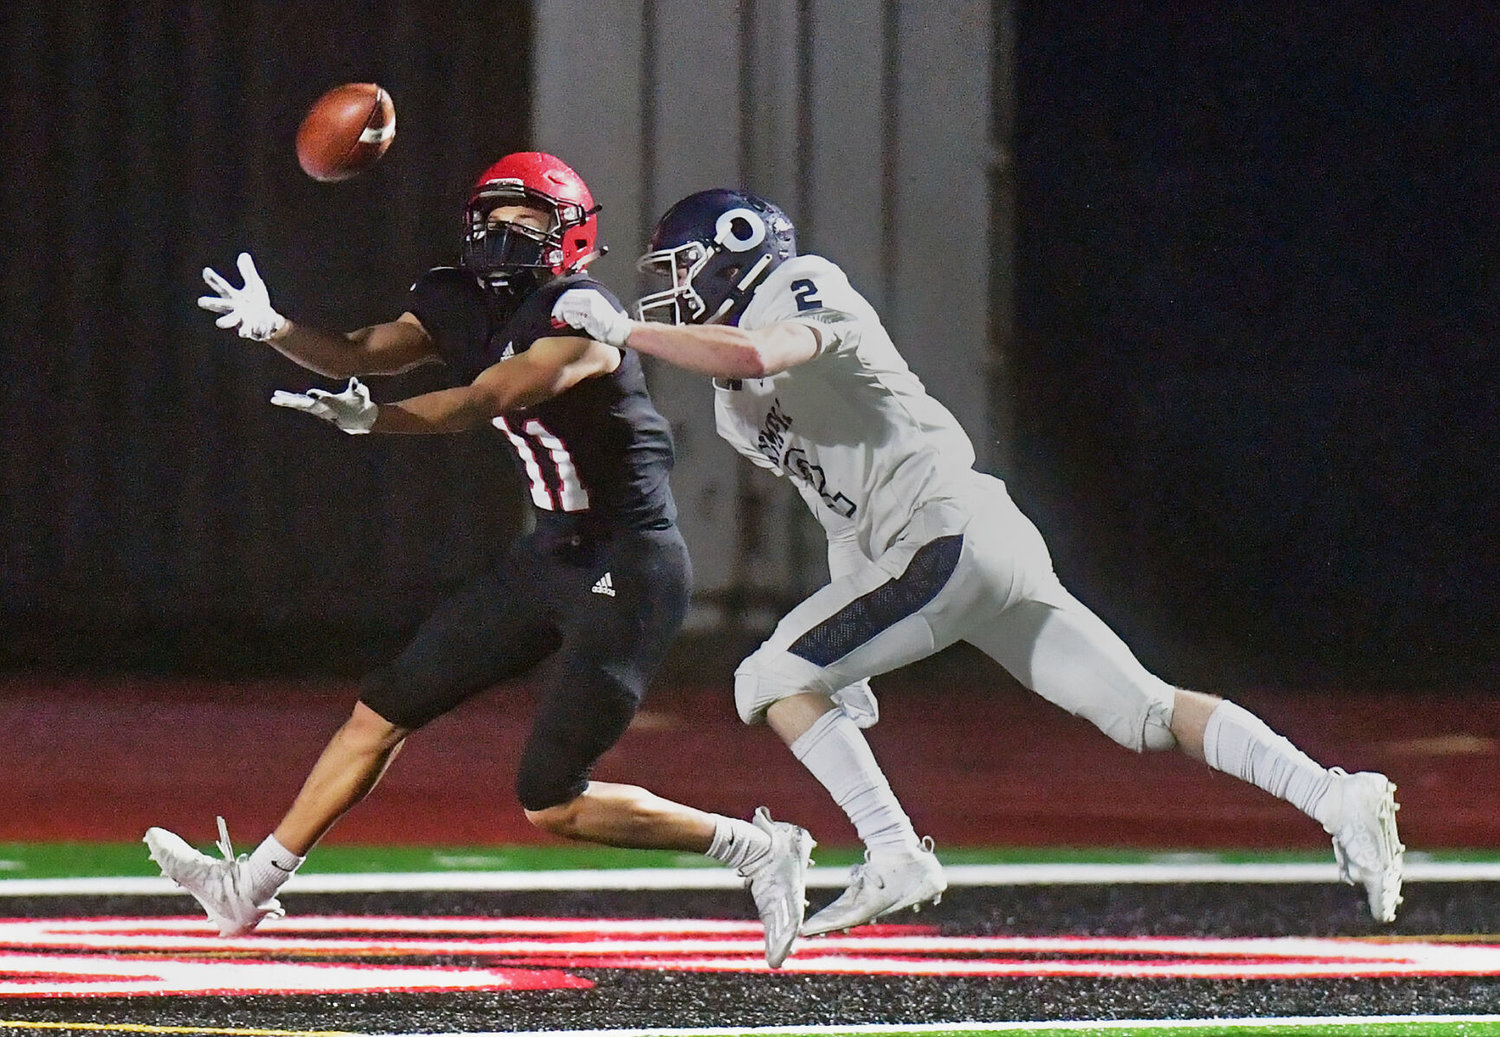 Yelm High School wide receiver Terelle Dunn stretches for a pass in the end zone against an Olympia High School defender on Friday, Feb. 19, at the YHS stadium, but didn't quite make the catch.